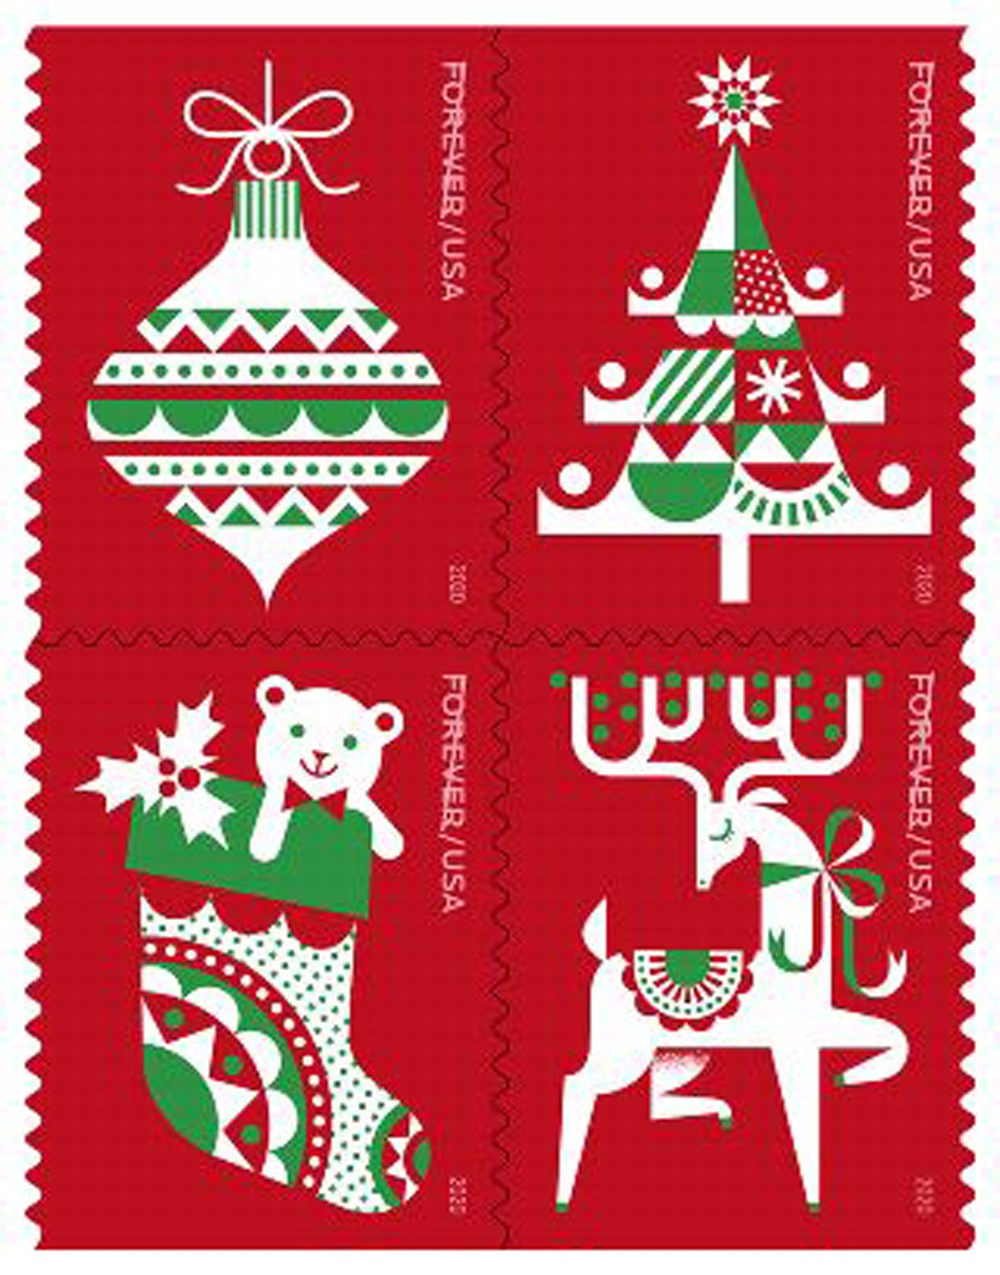 NEW Holiday Delights Forever Stamps Book of 20 Forever Postage Stamps